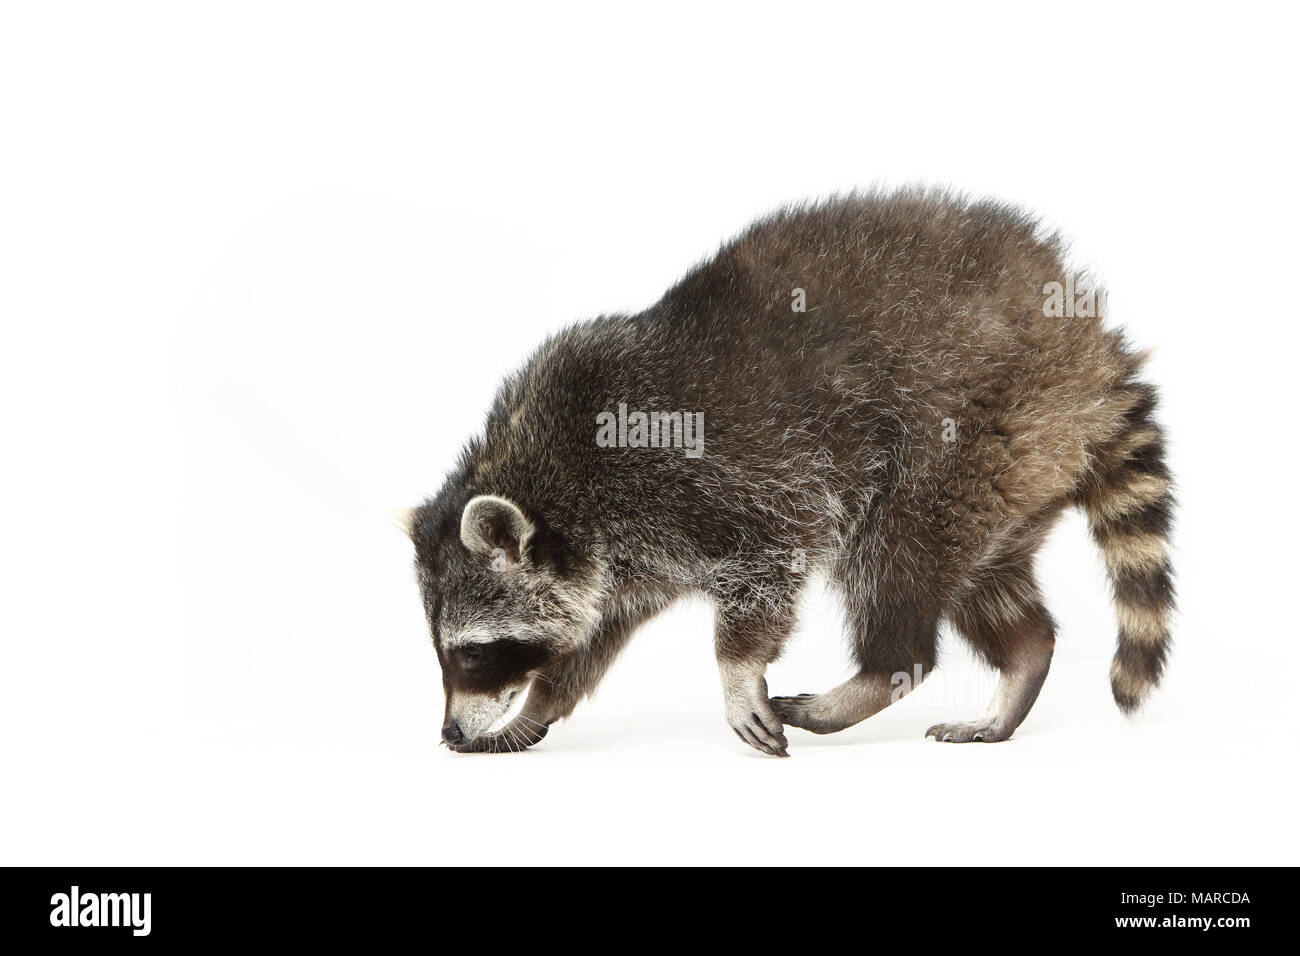 Raccoon (Procyon lotor). Adult walking, seen side-on. Studio picture against a white background. Germany Stock Photo